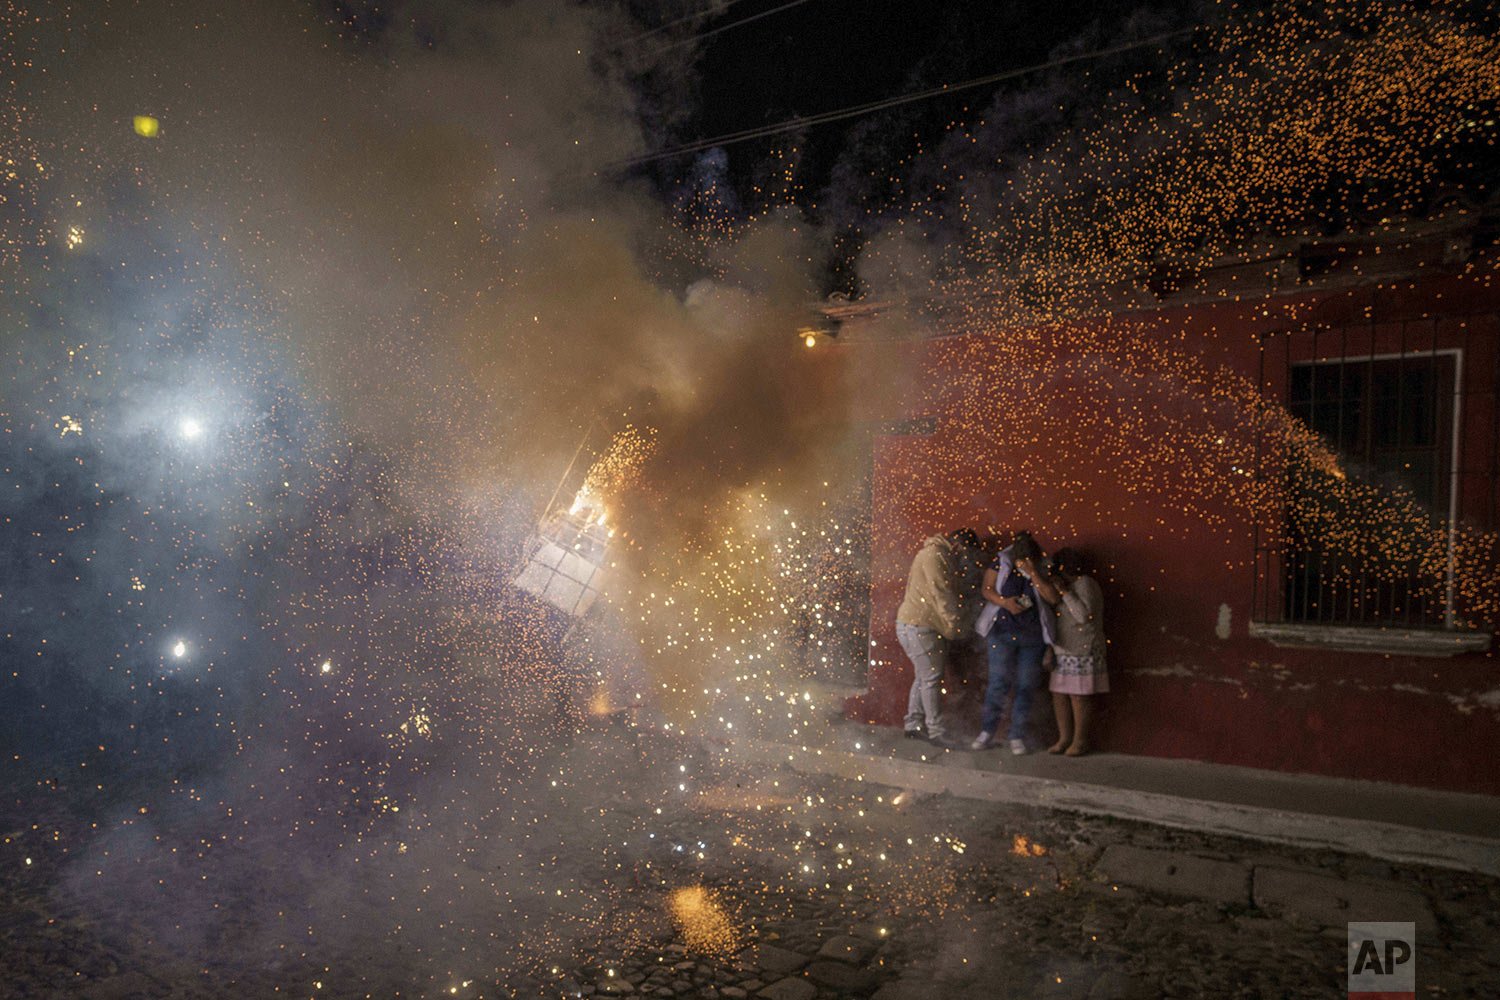  People cover themselves in front of a man wearing a "torito," a bull-shaped harness equipped with fireworks, during a Christmas celebration in Antigua, Guatemala, Dec. 25, 2021. (AP Photo/Moises Castillo) 